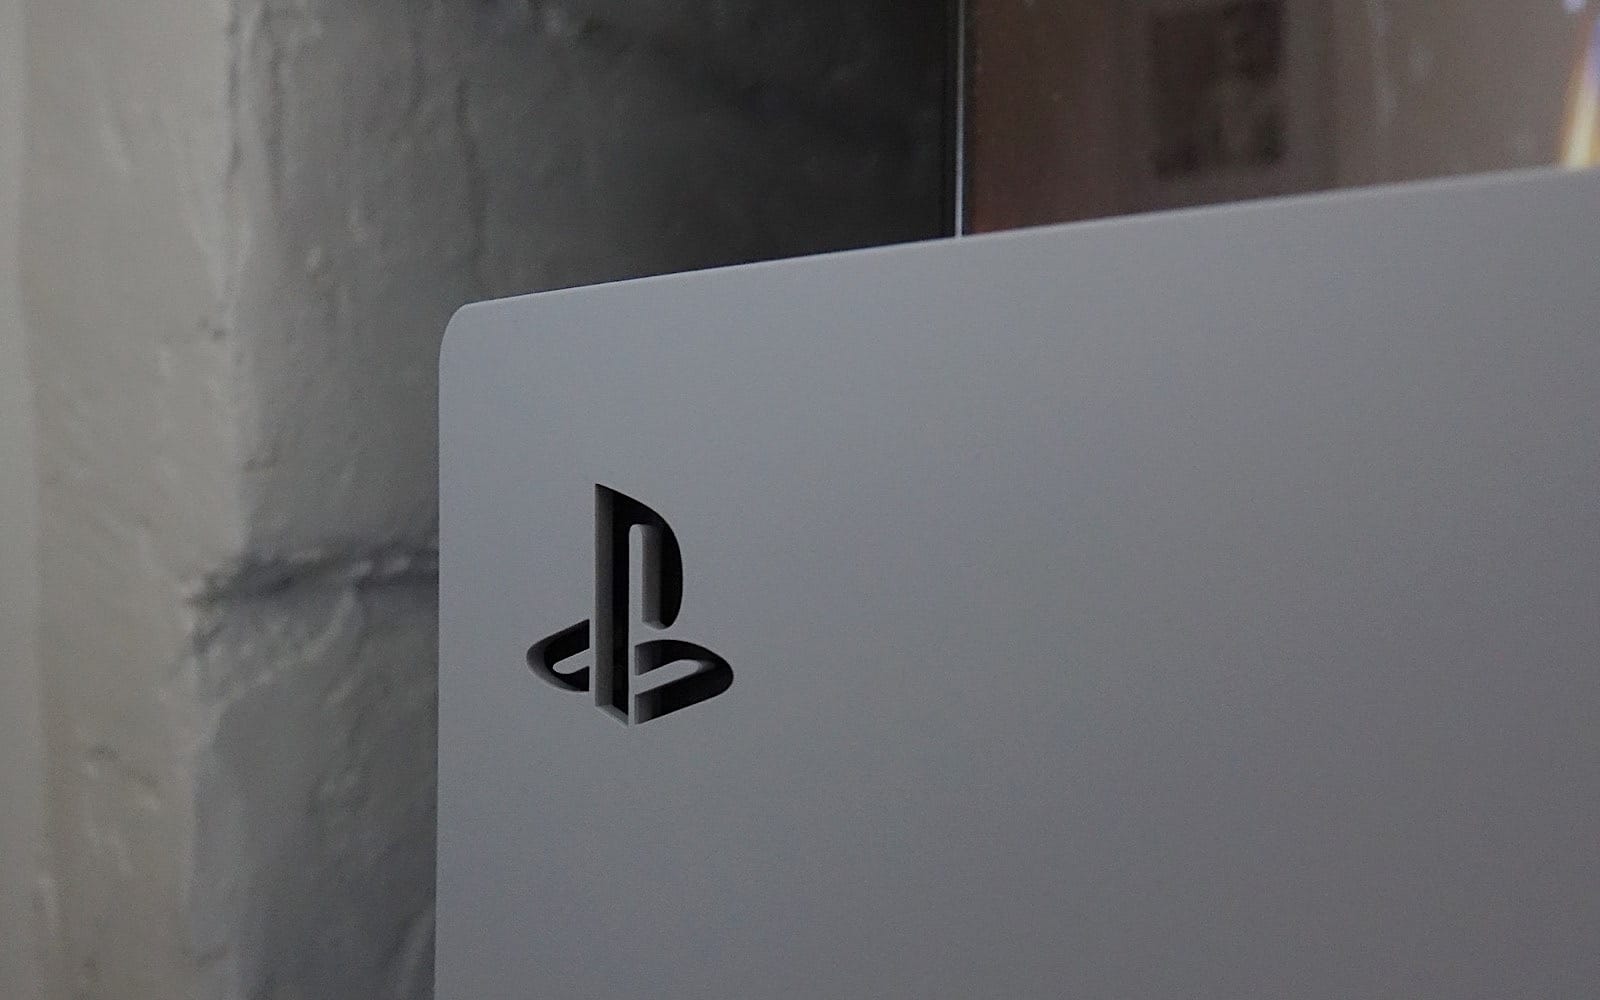 Details on the PlayStation 5